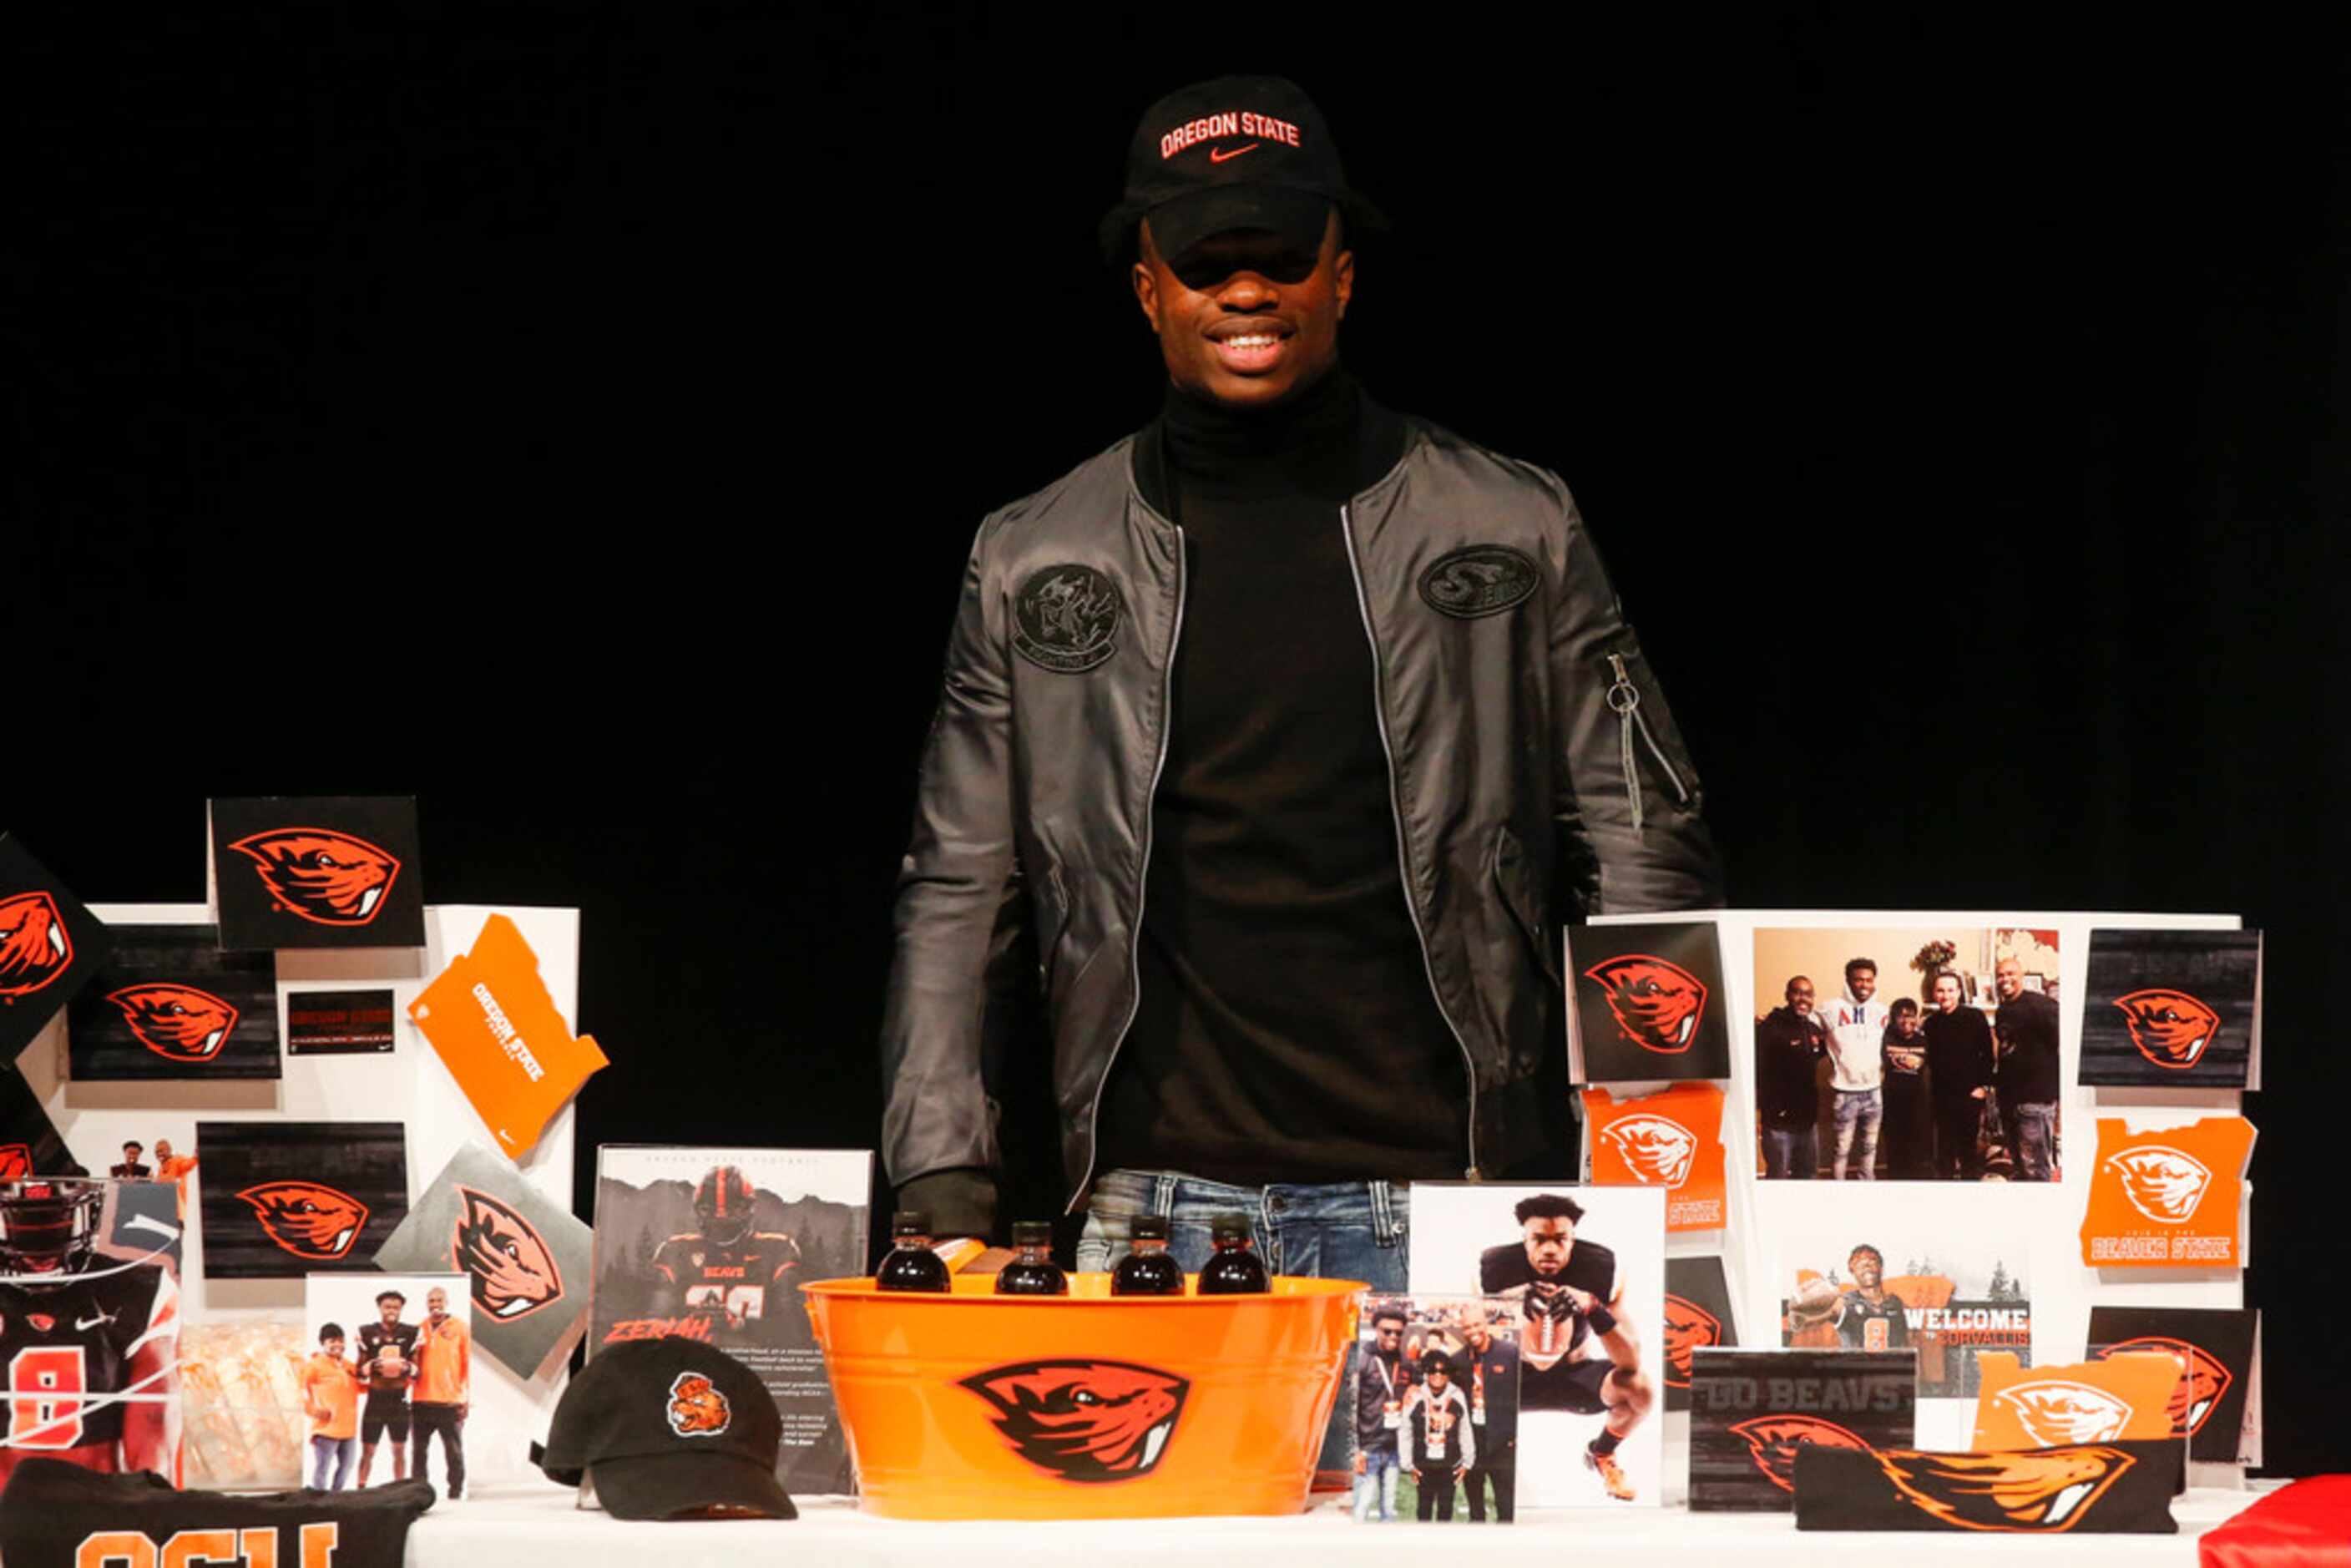 Zeriah Beason, who signed with Oregon State University, stands during a National Signing Day...